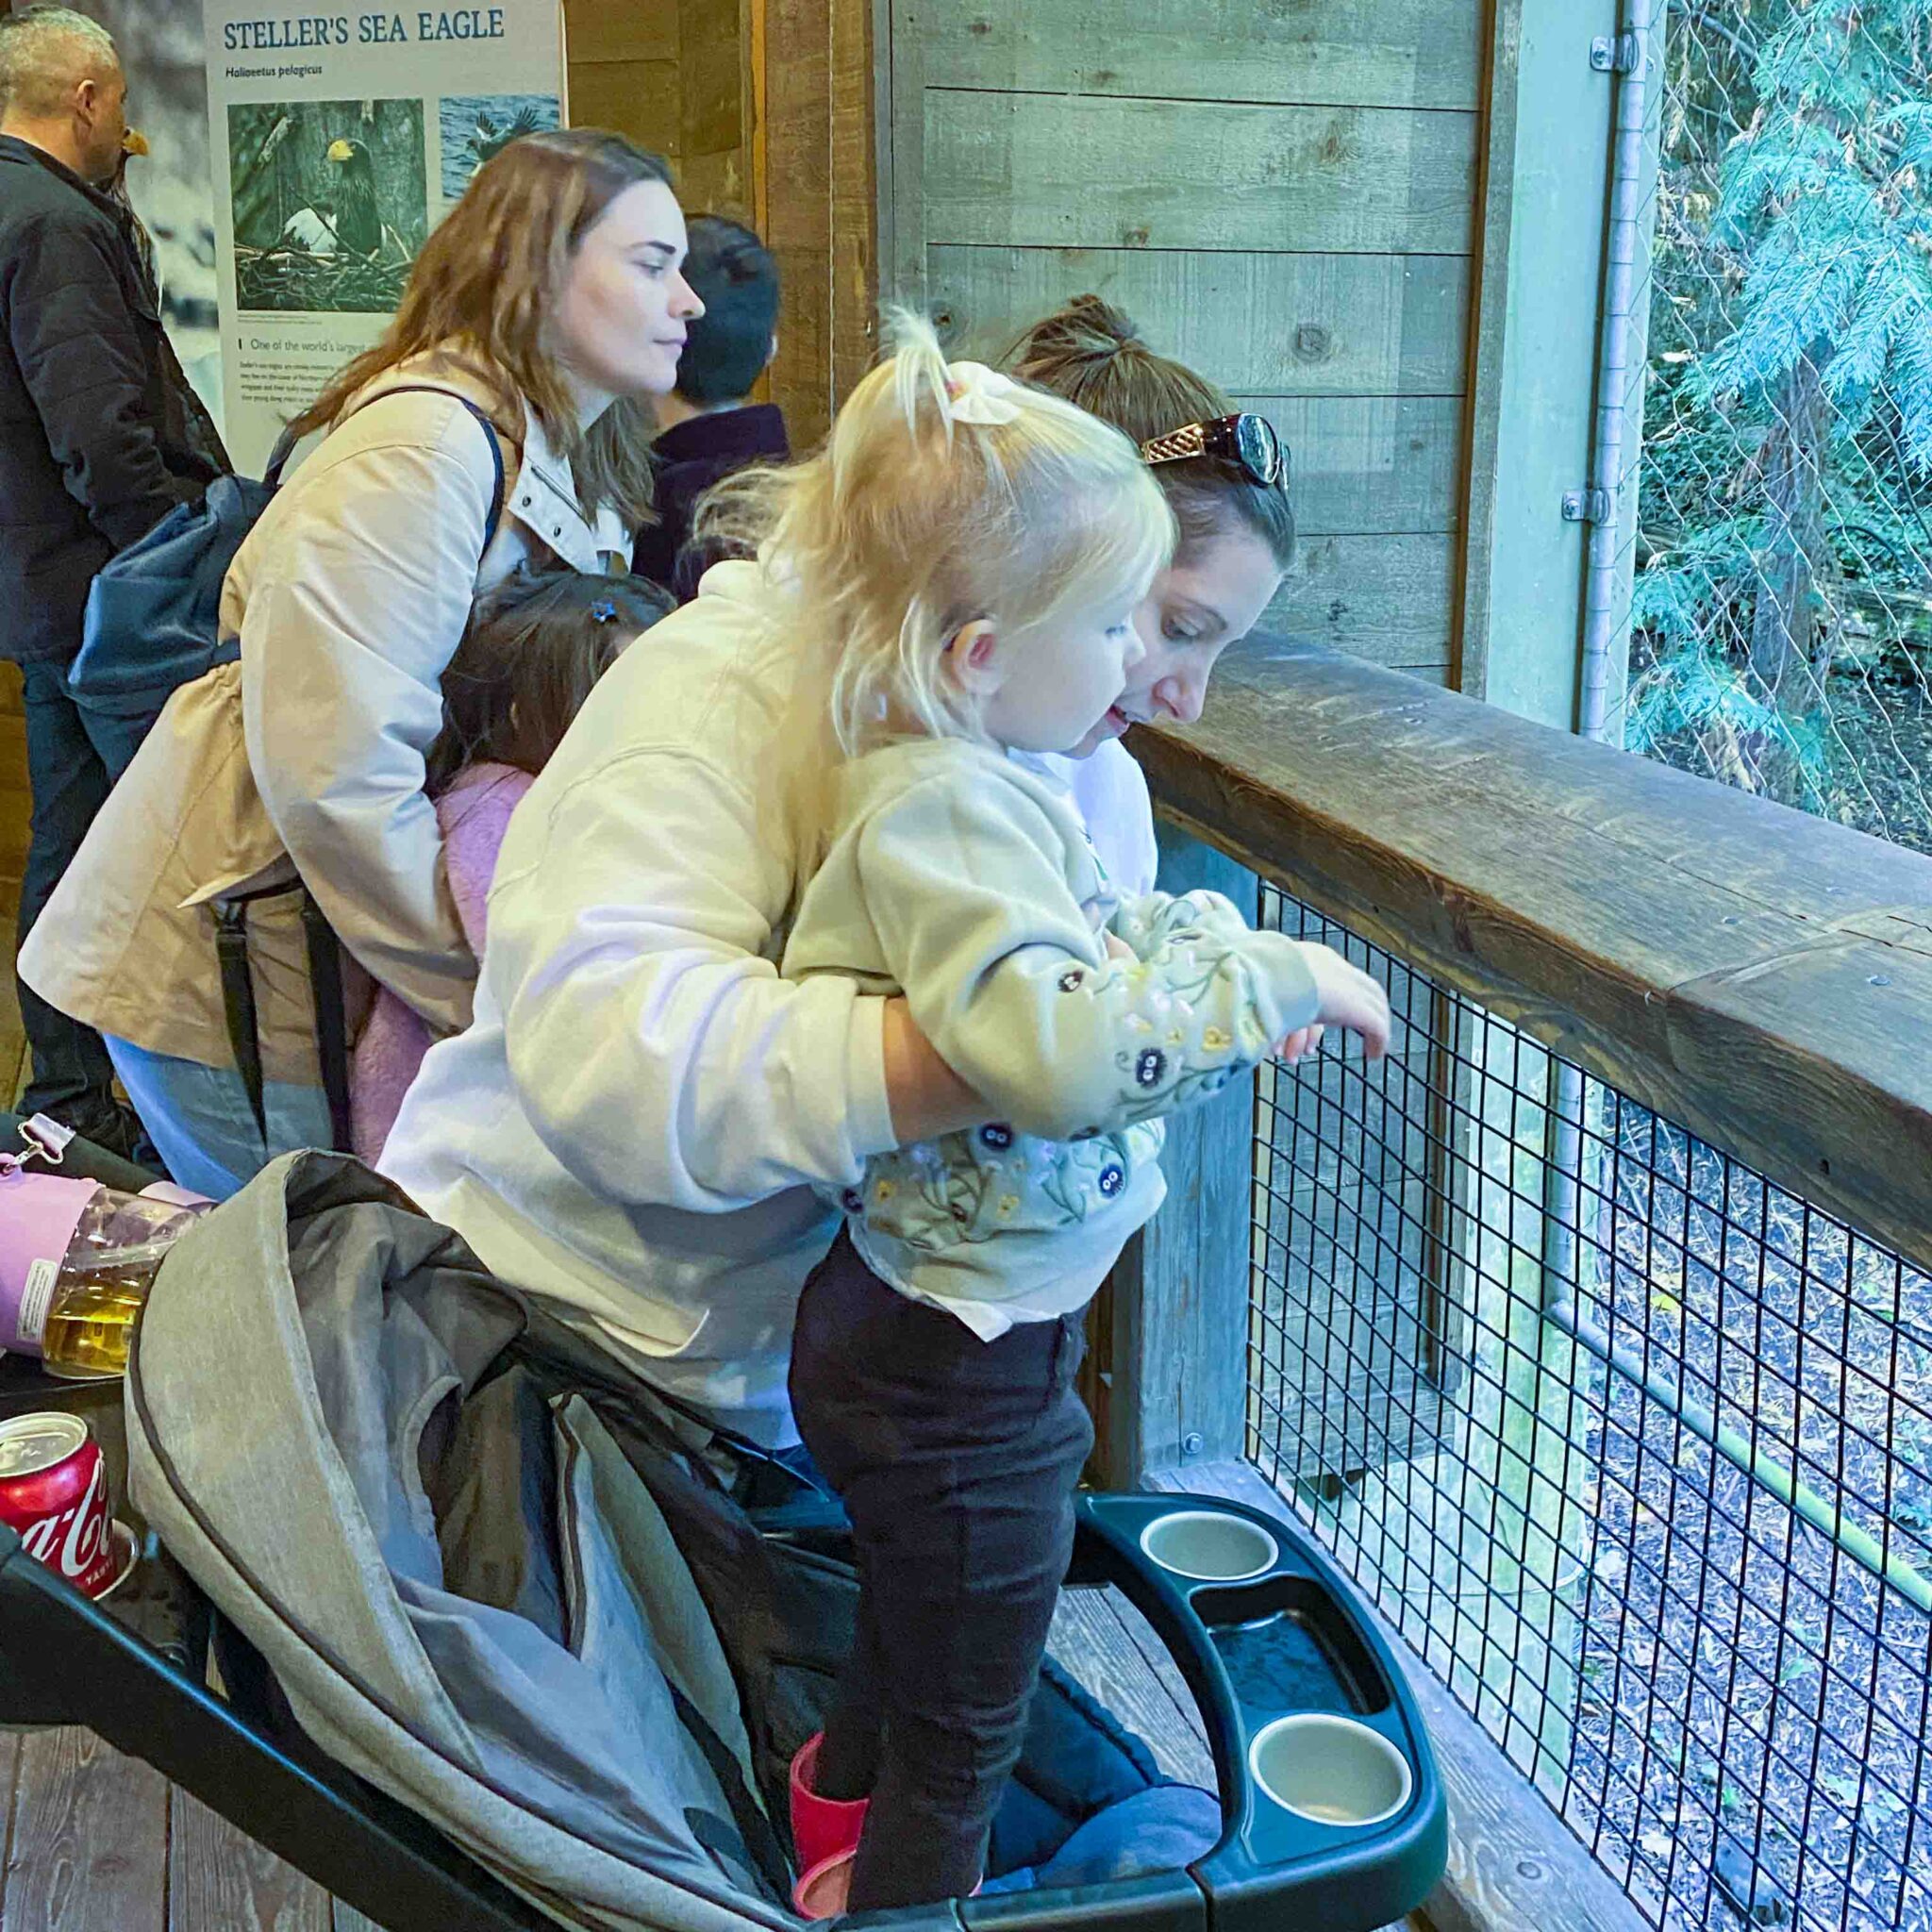 The mother holds her daughter up as she stands on her stroller to see the animals at the zoo.